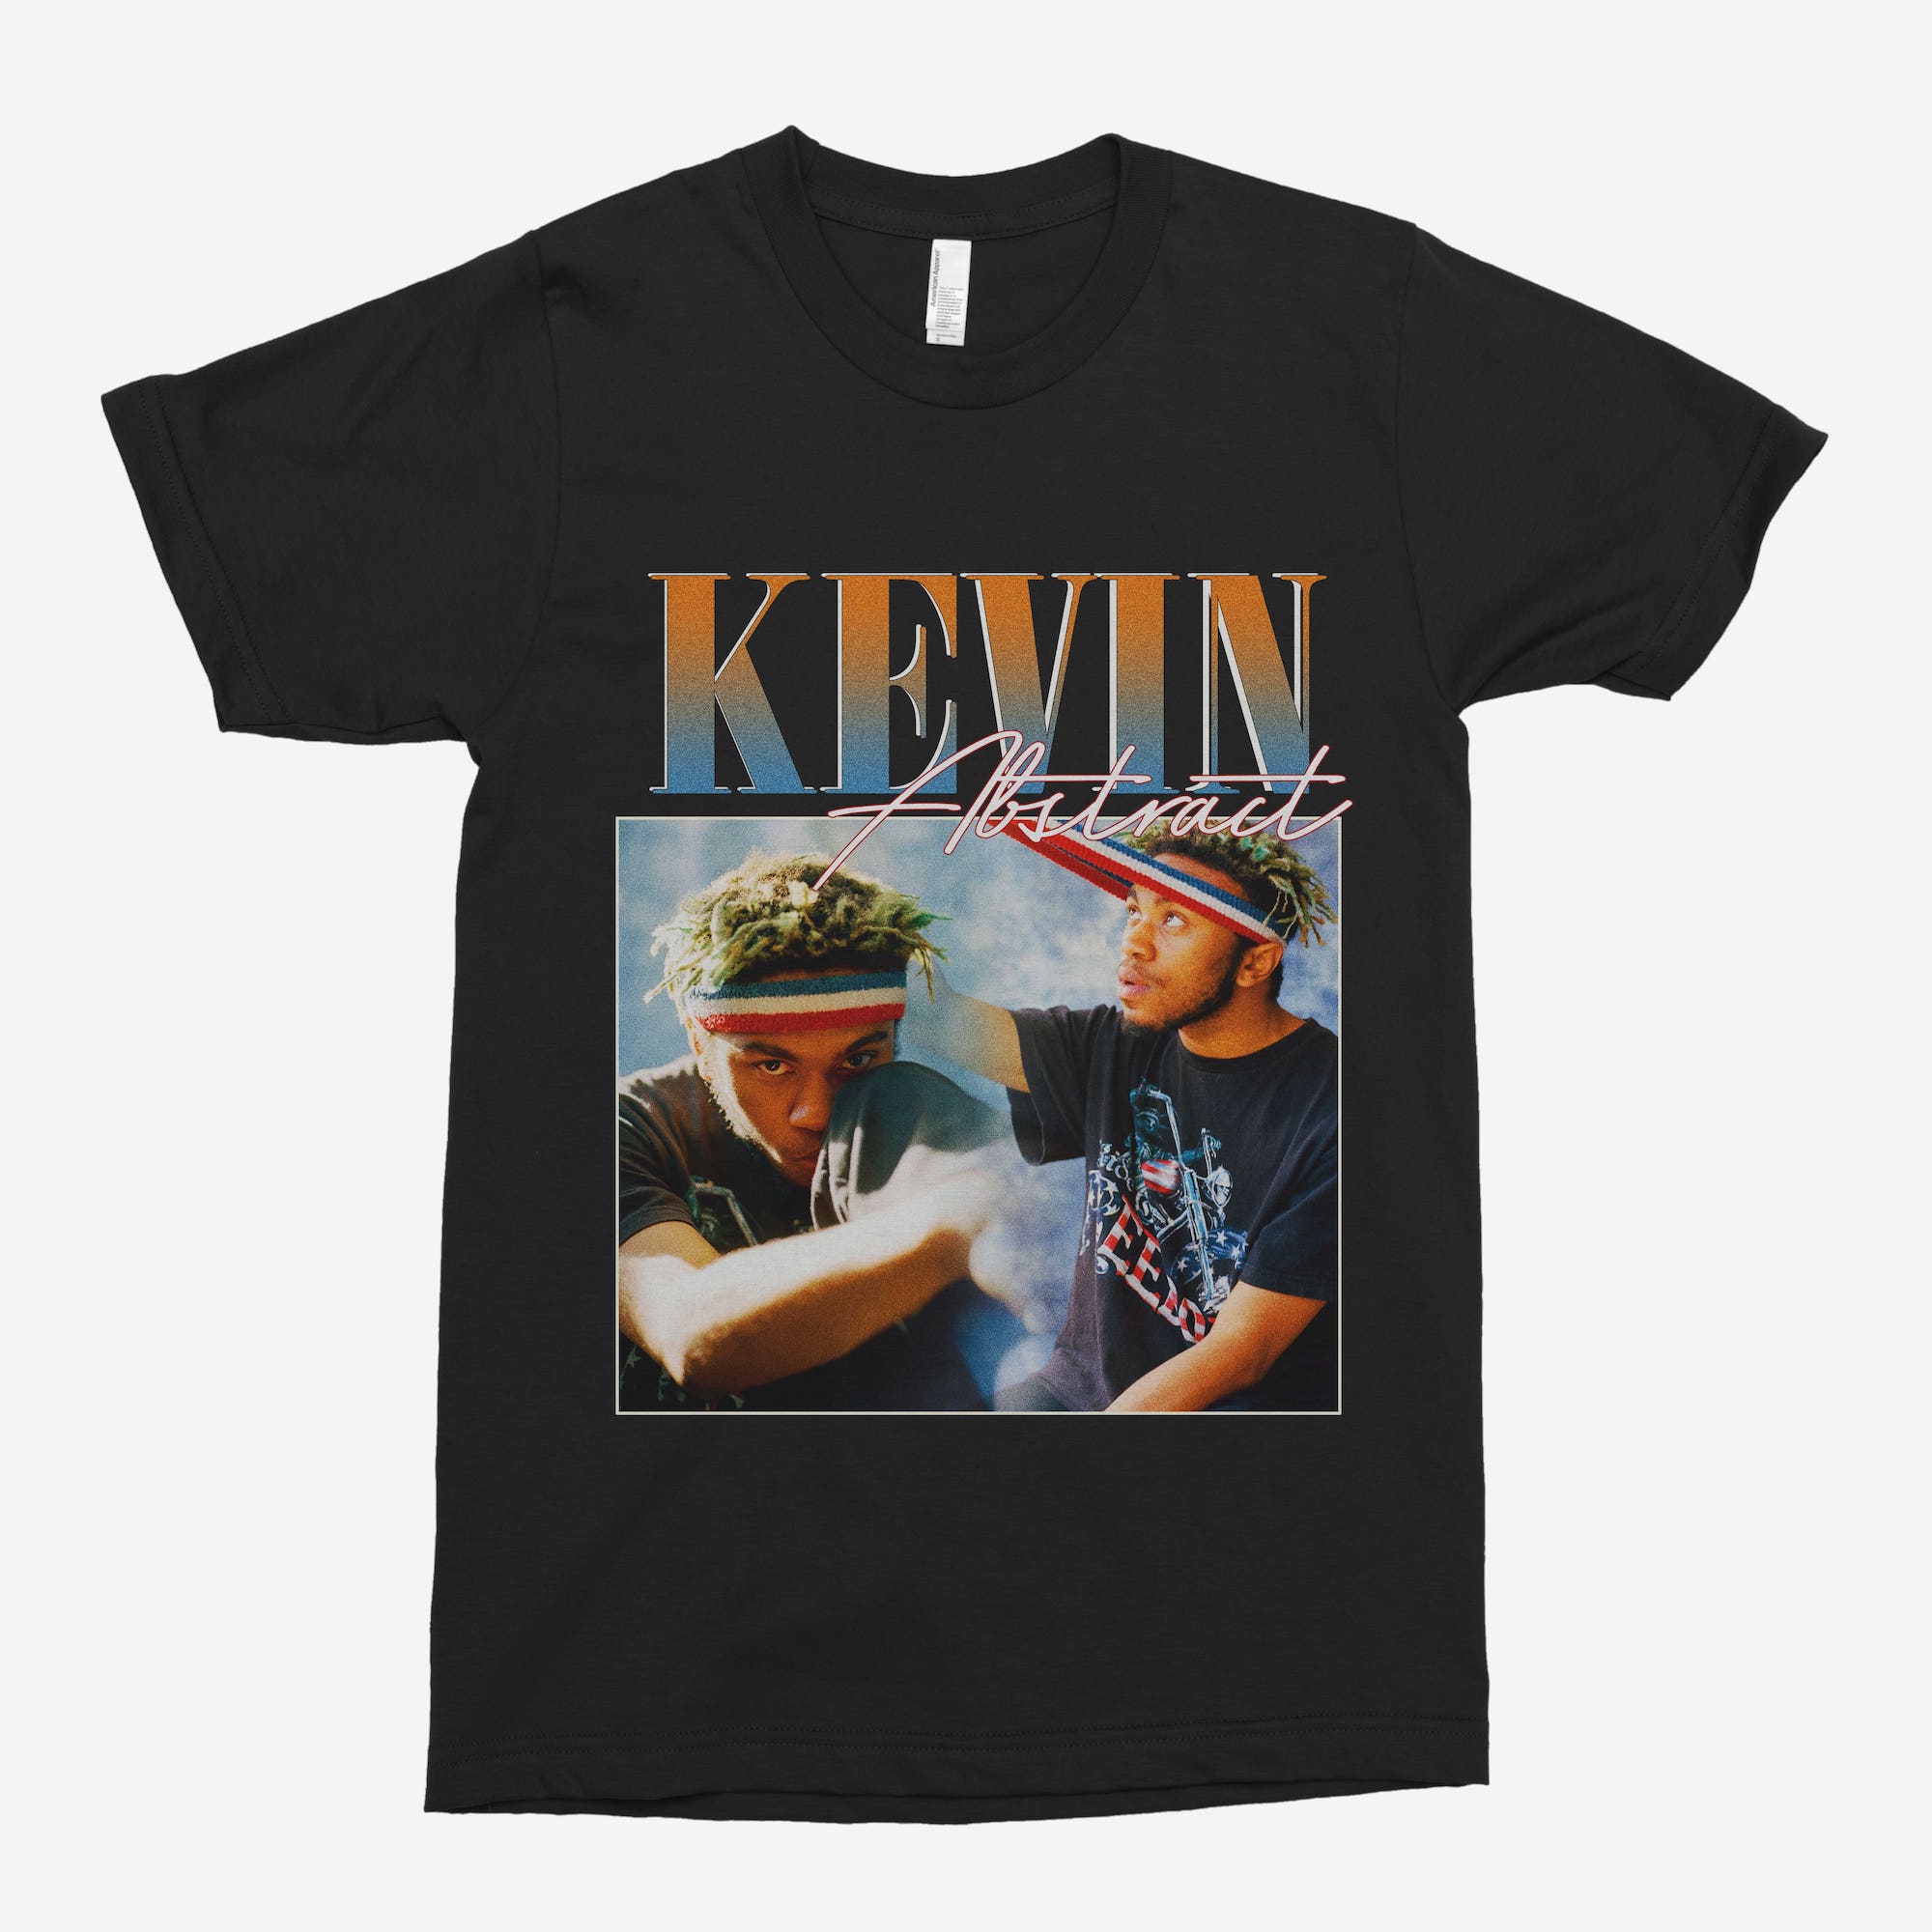 Kevin Abstract Vintage Unisex T-Shirt